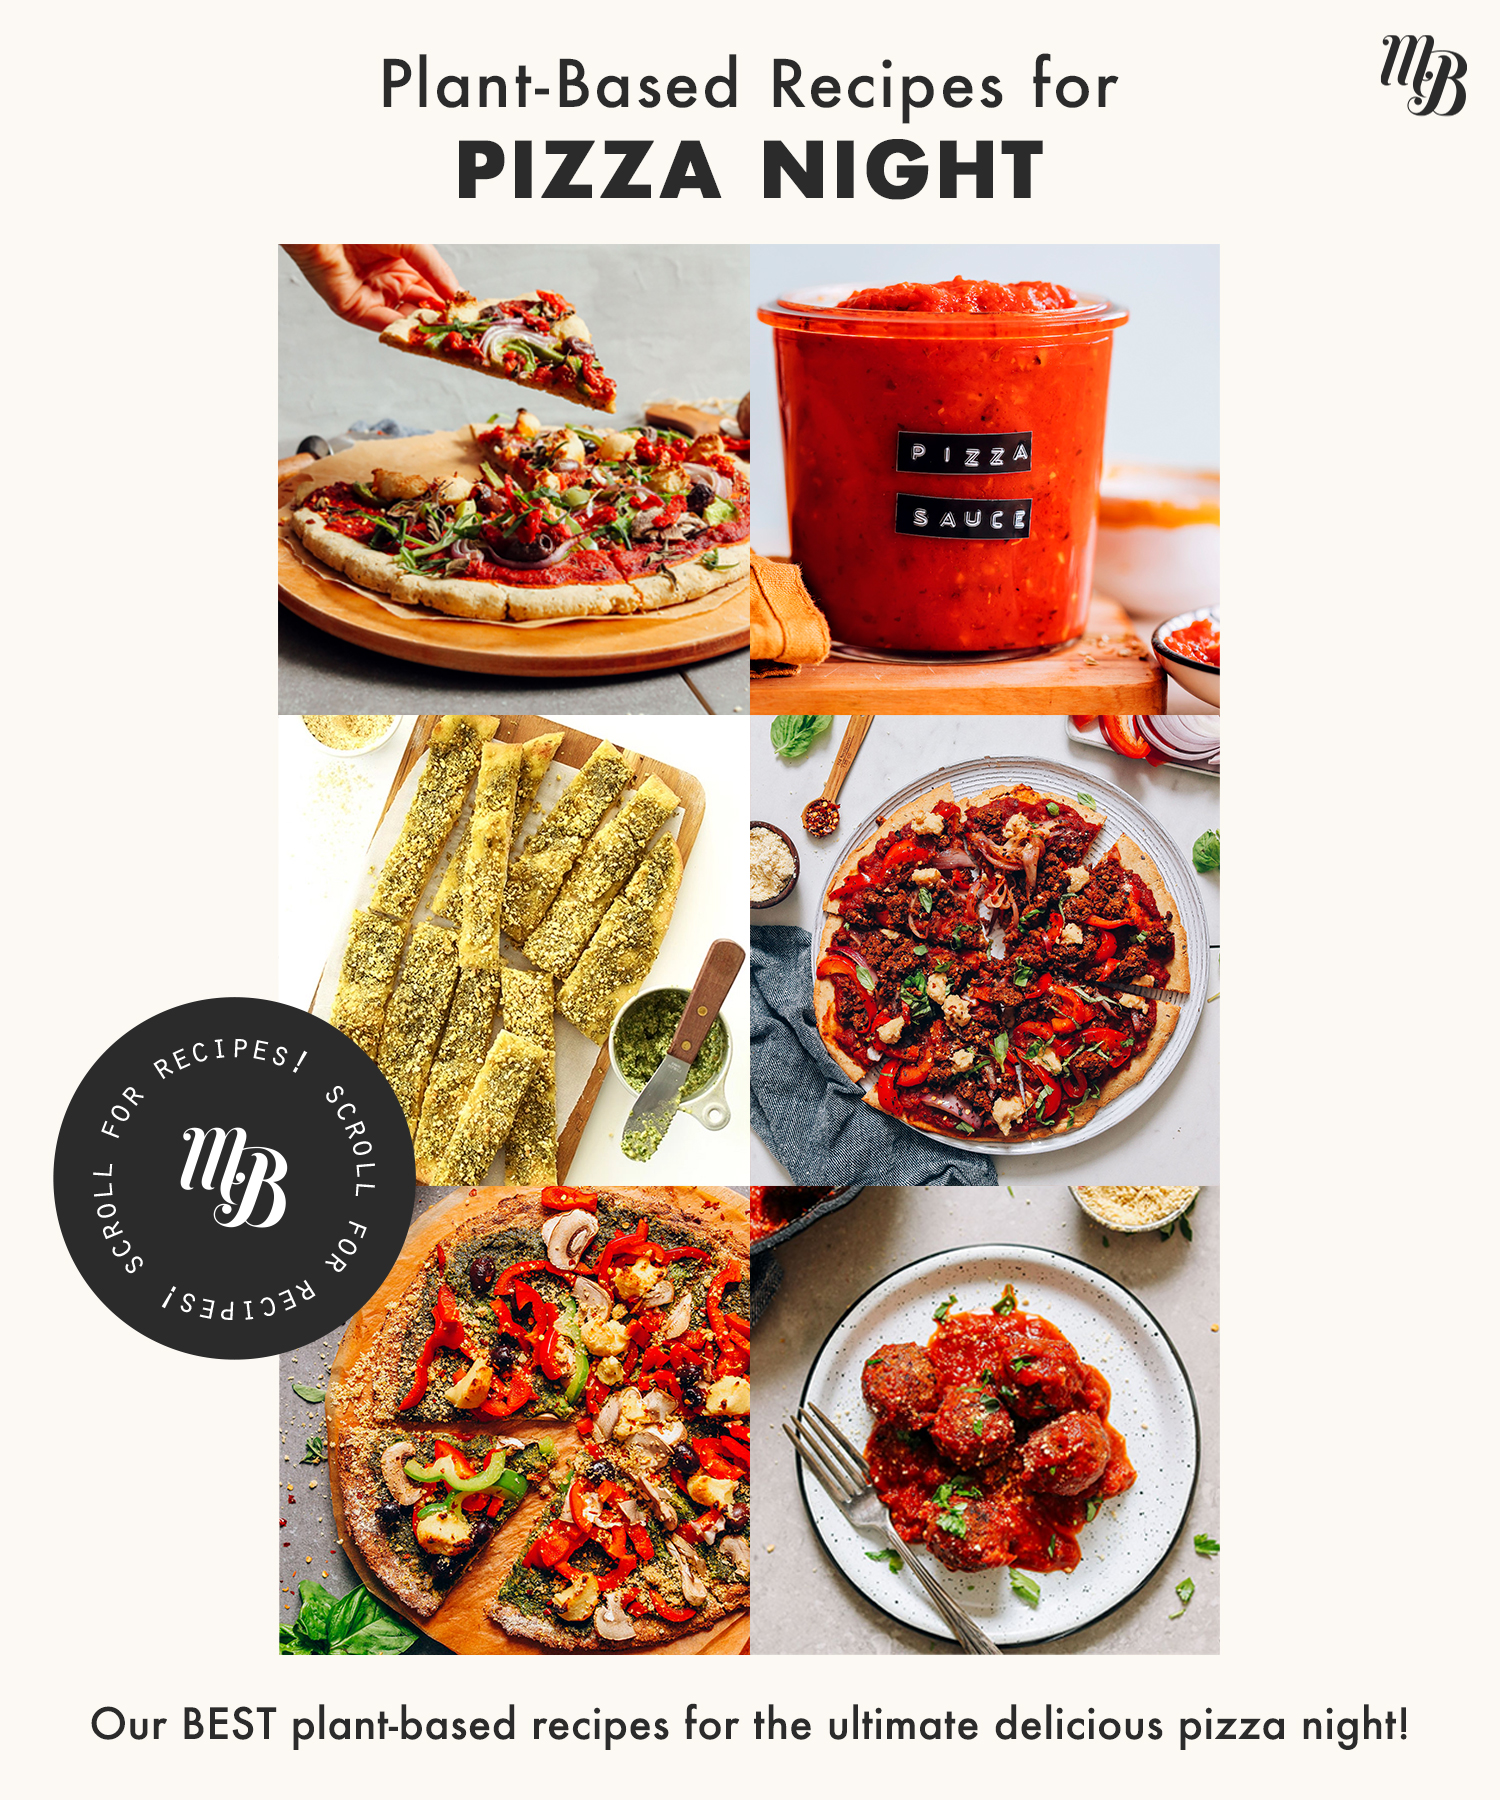 Assortment of plant-based recipes for pizza night